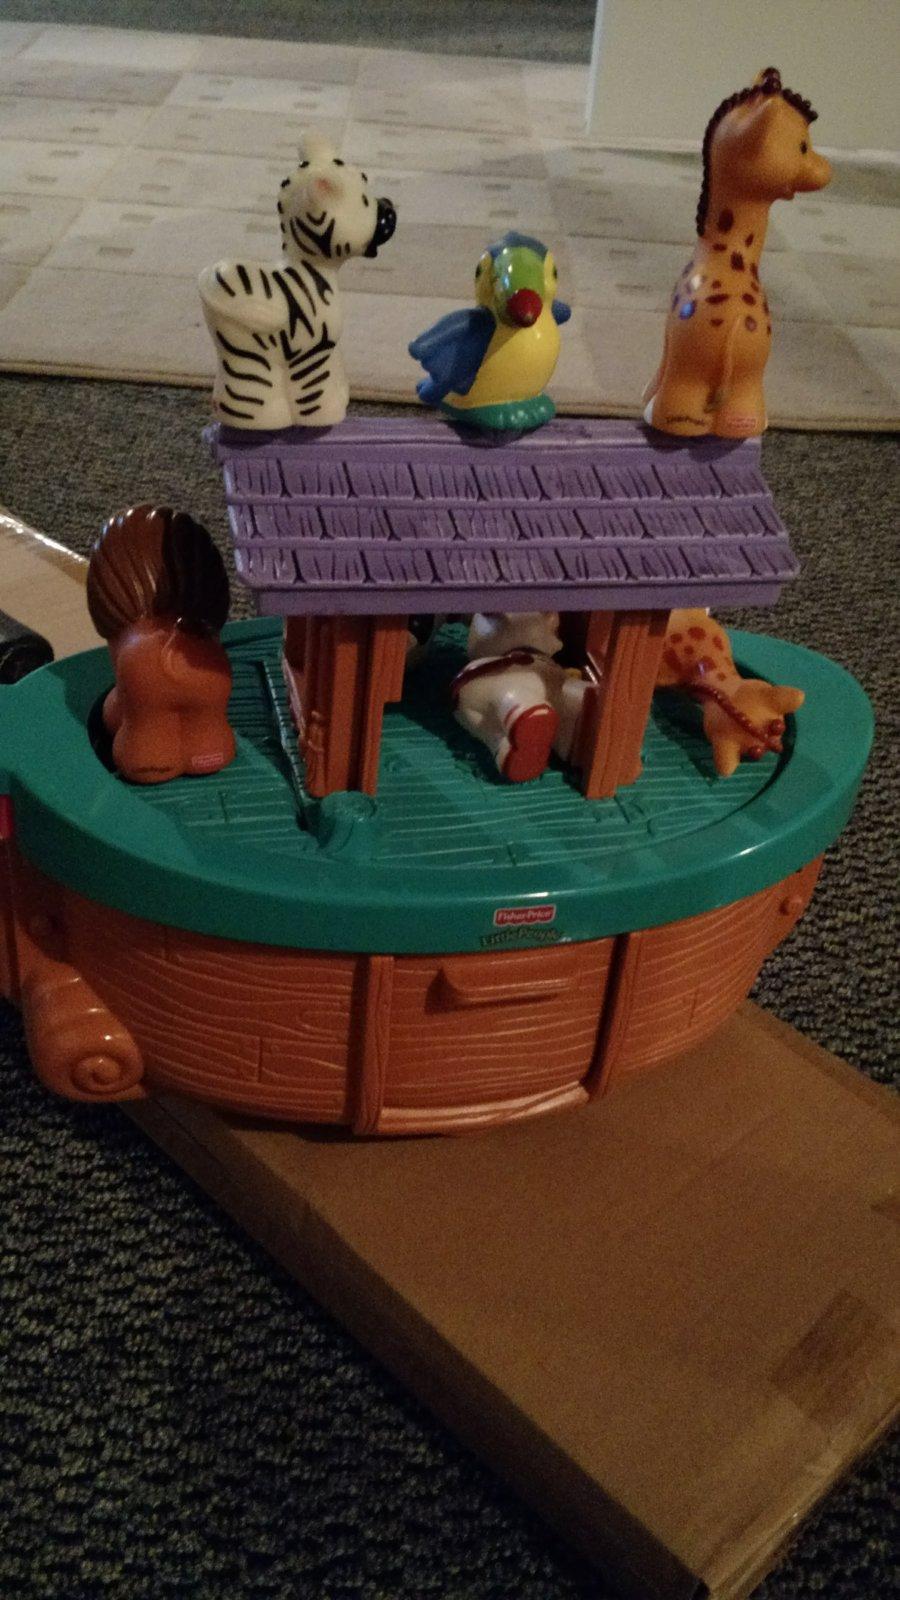 Noa's Ark from Ms. Gina or Aunt A. Still very much loved.